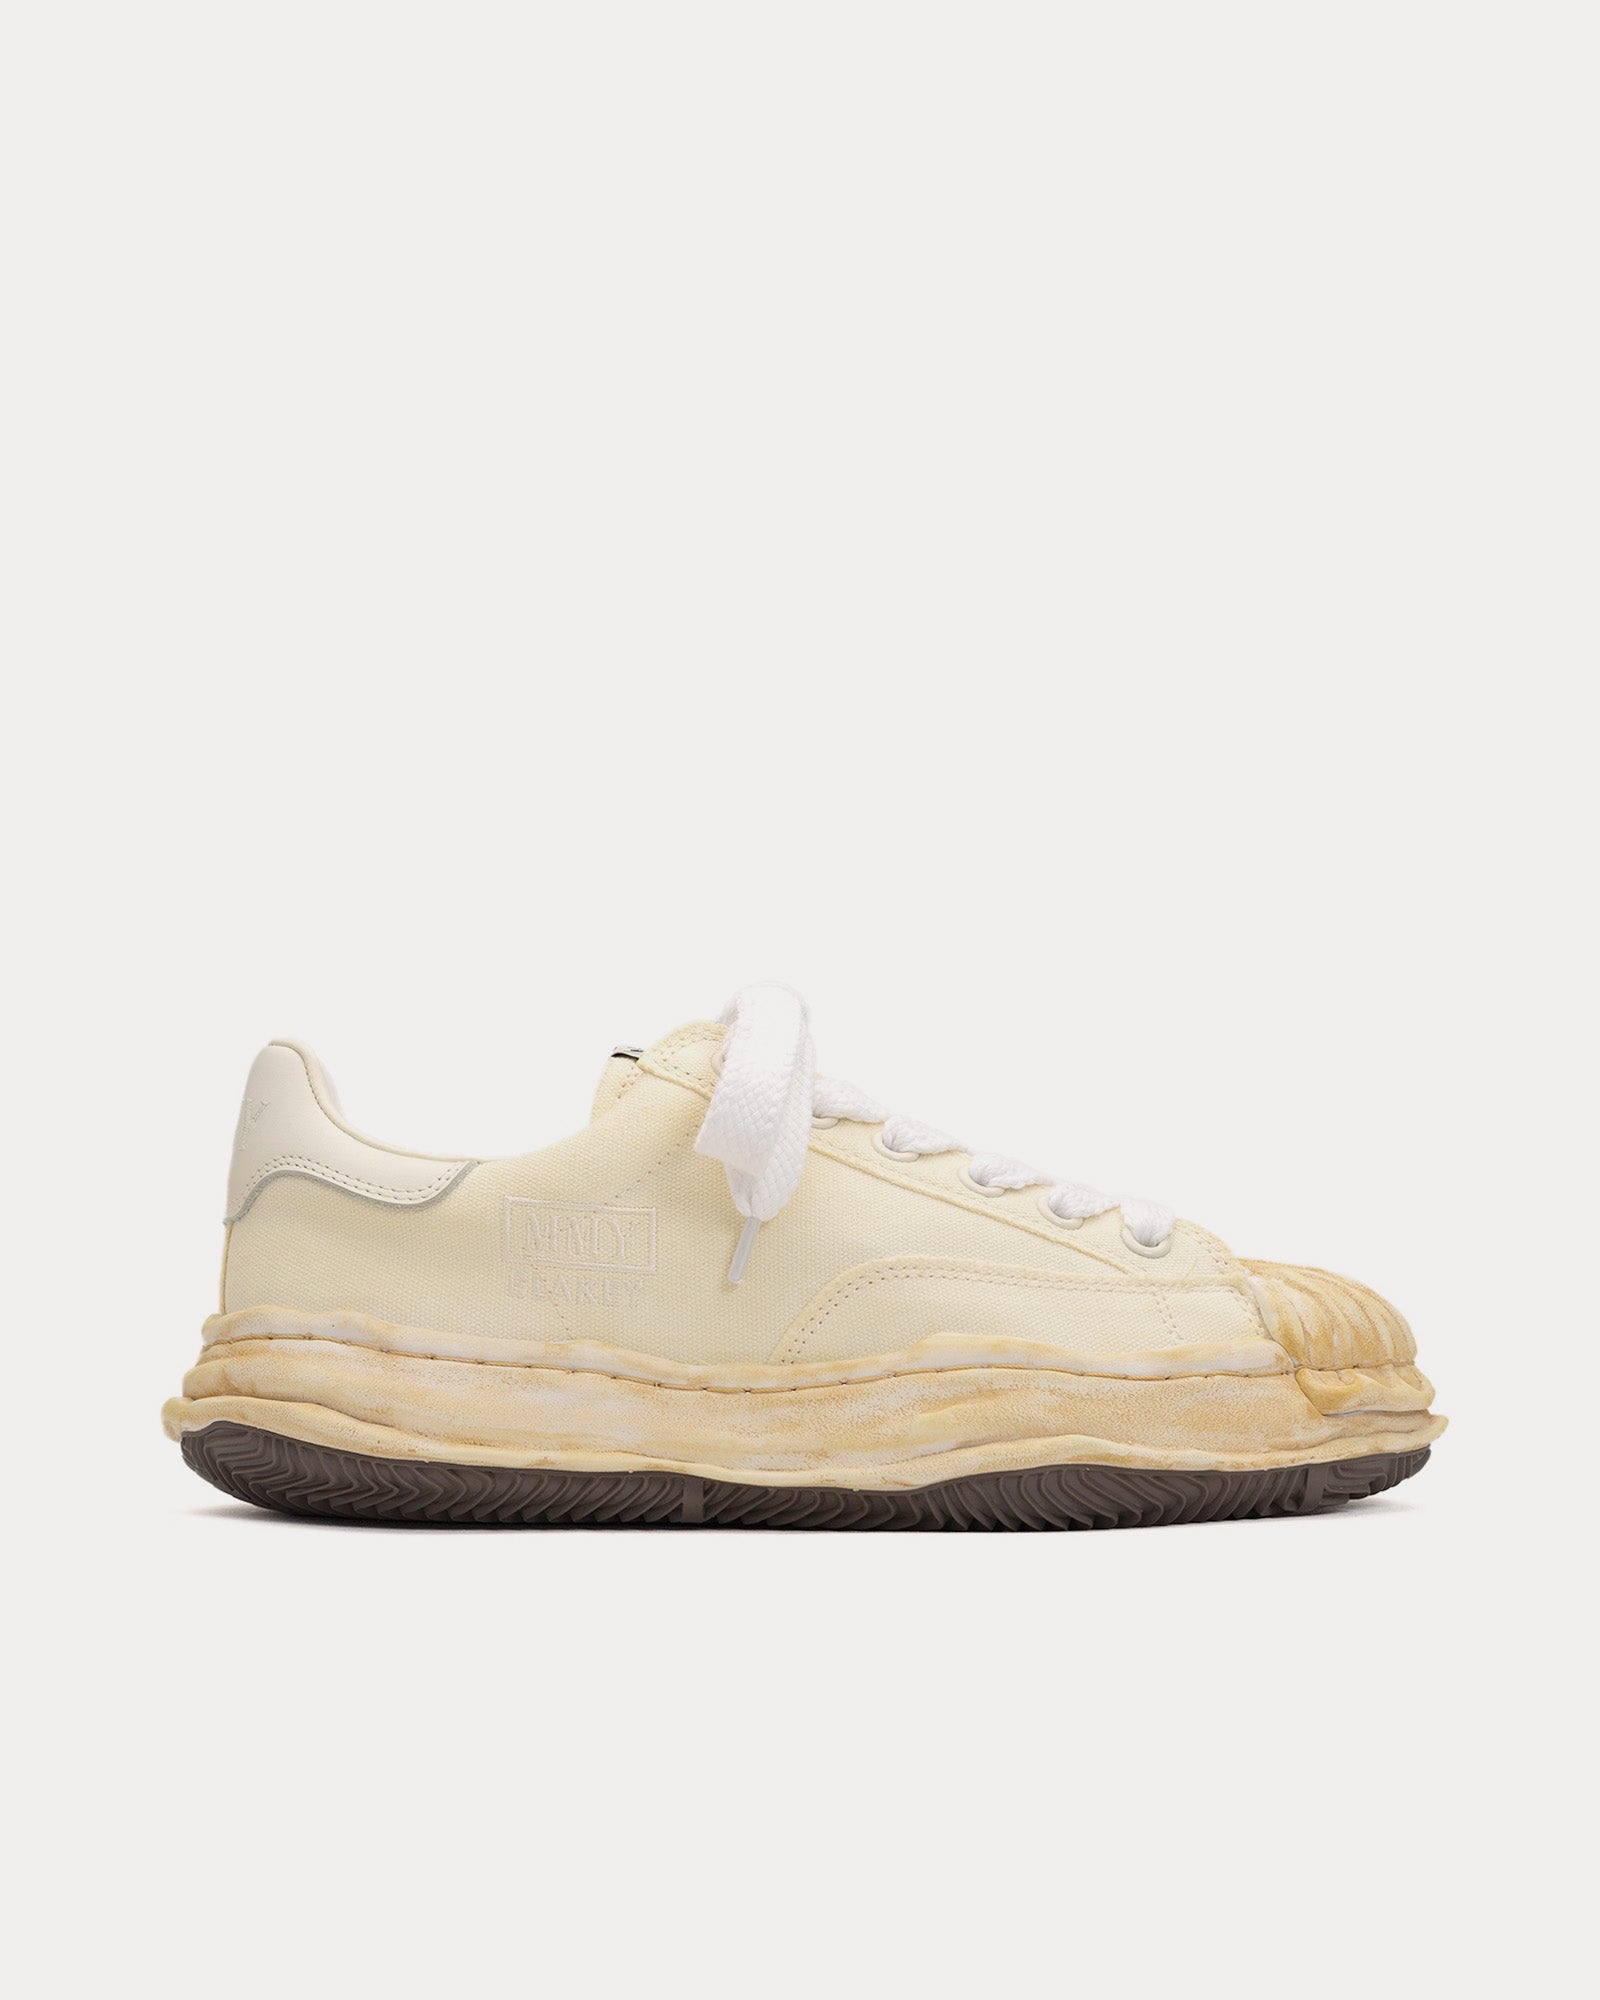 Mihara Yasuhiro - Blakey OG Sole Over-Dyed Canvas White Low Top Sneakers